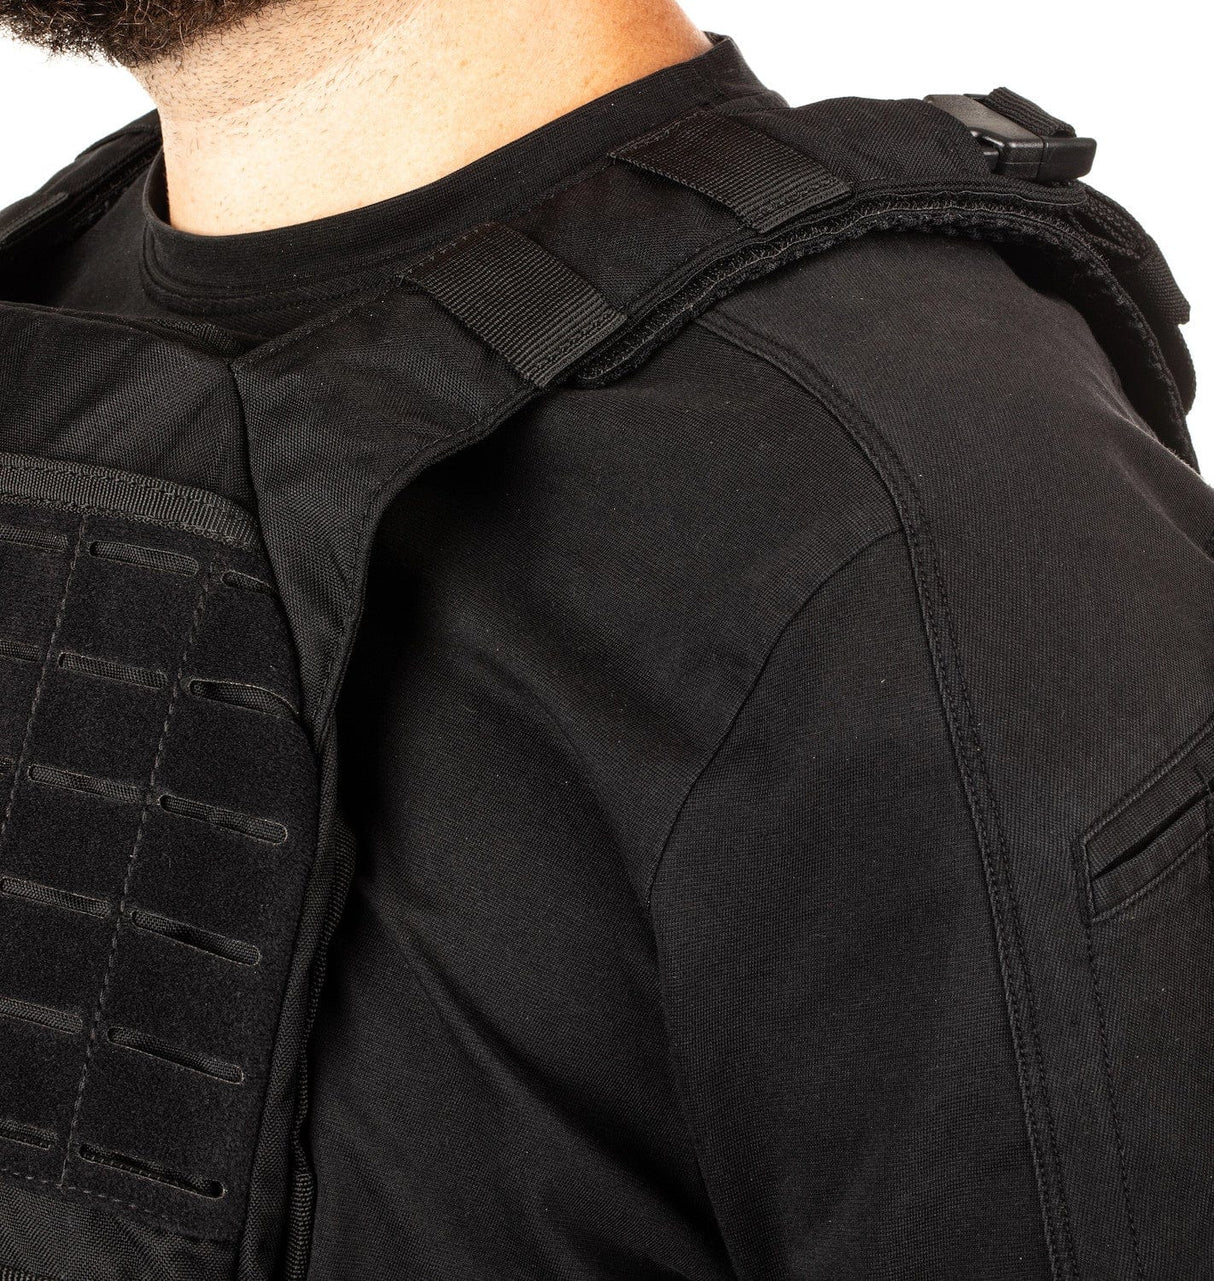 5.11 ABR CONVERTIBLE PLATE CARRIER